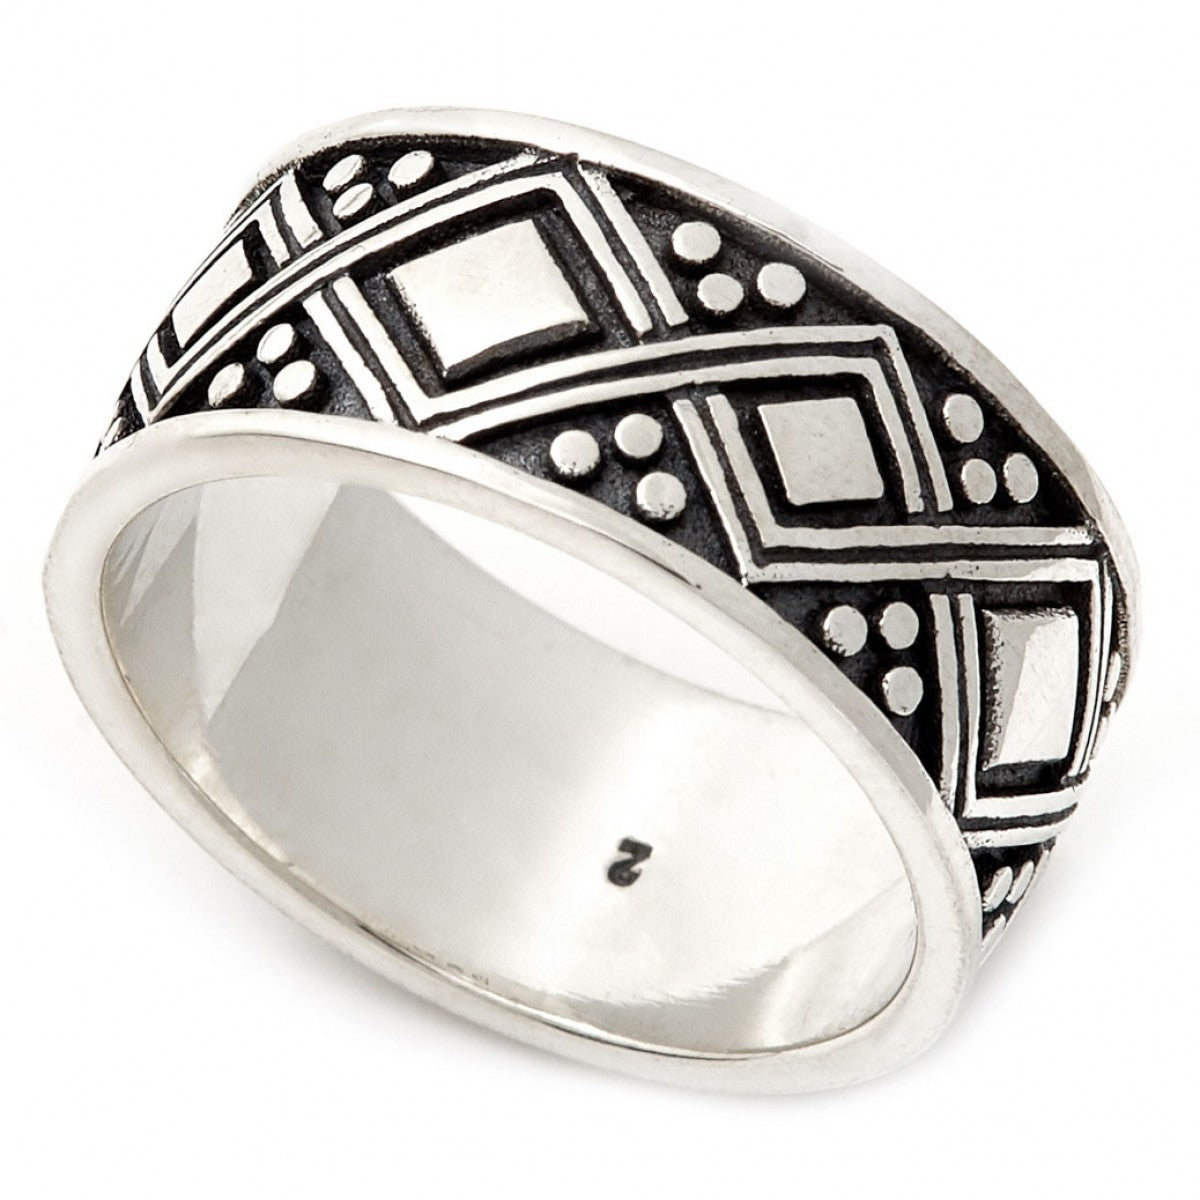 Konstantino Men's Sterling Silver Ring With Engraved Diamond Patterns